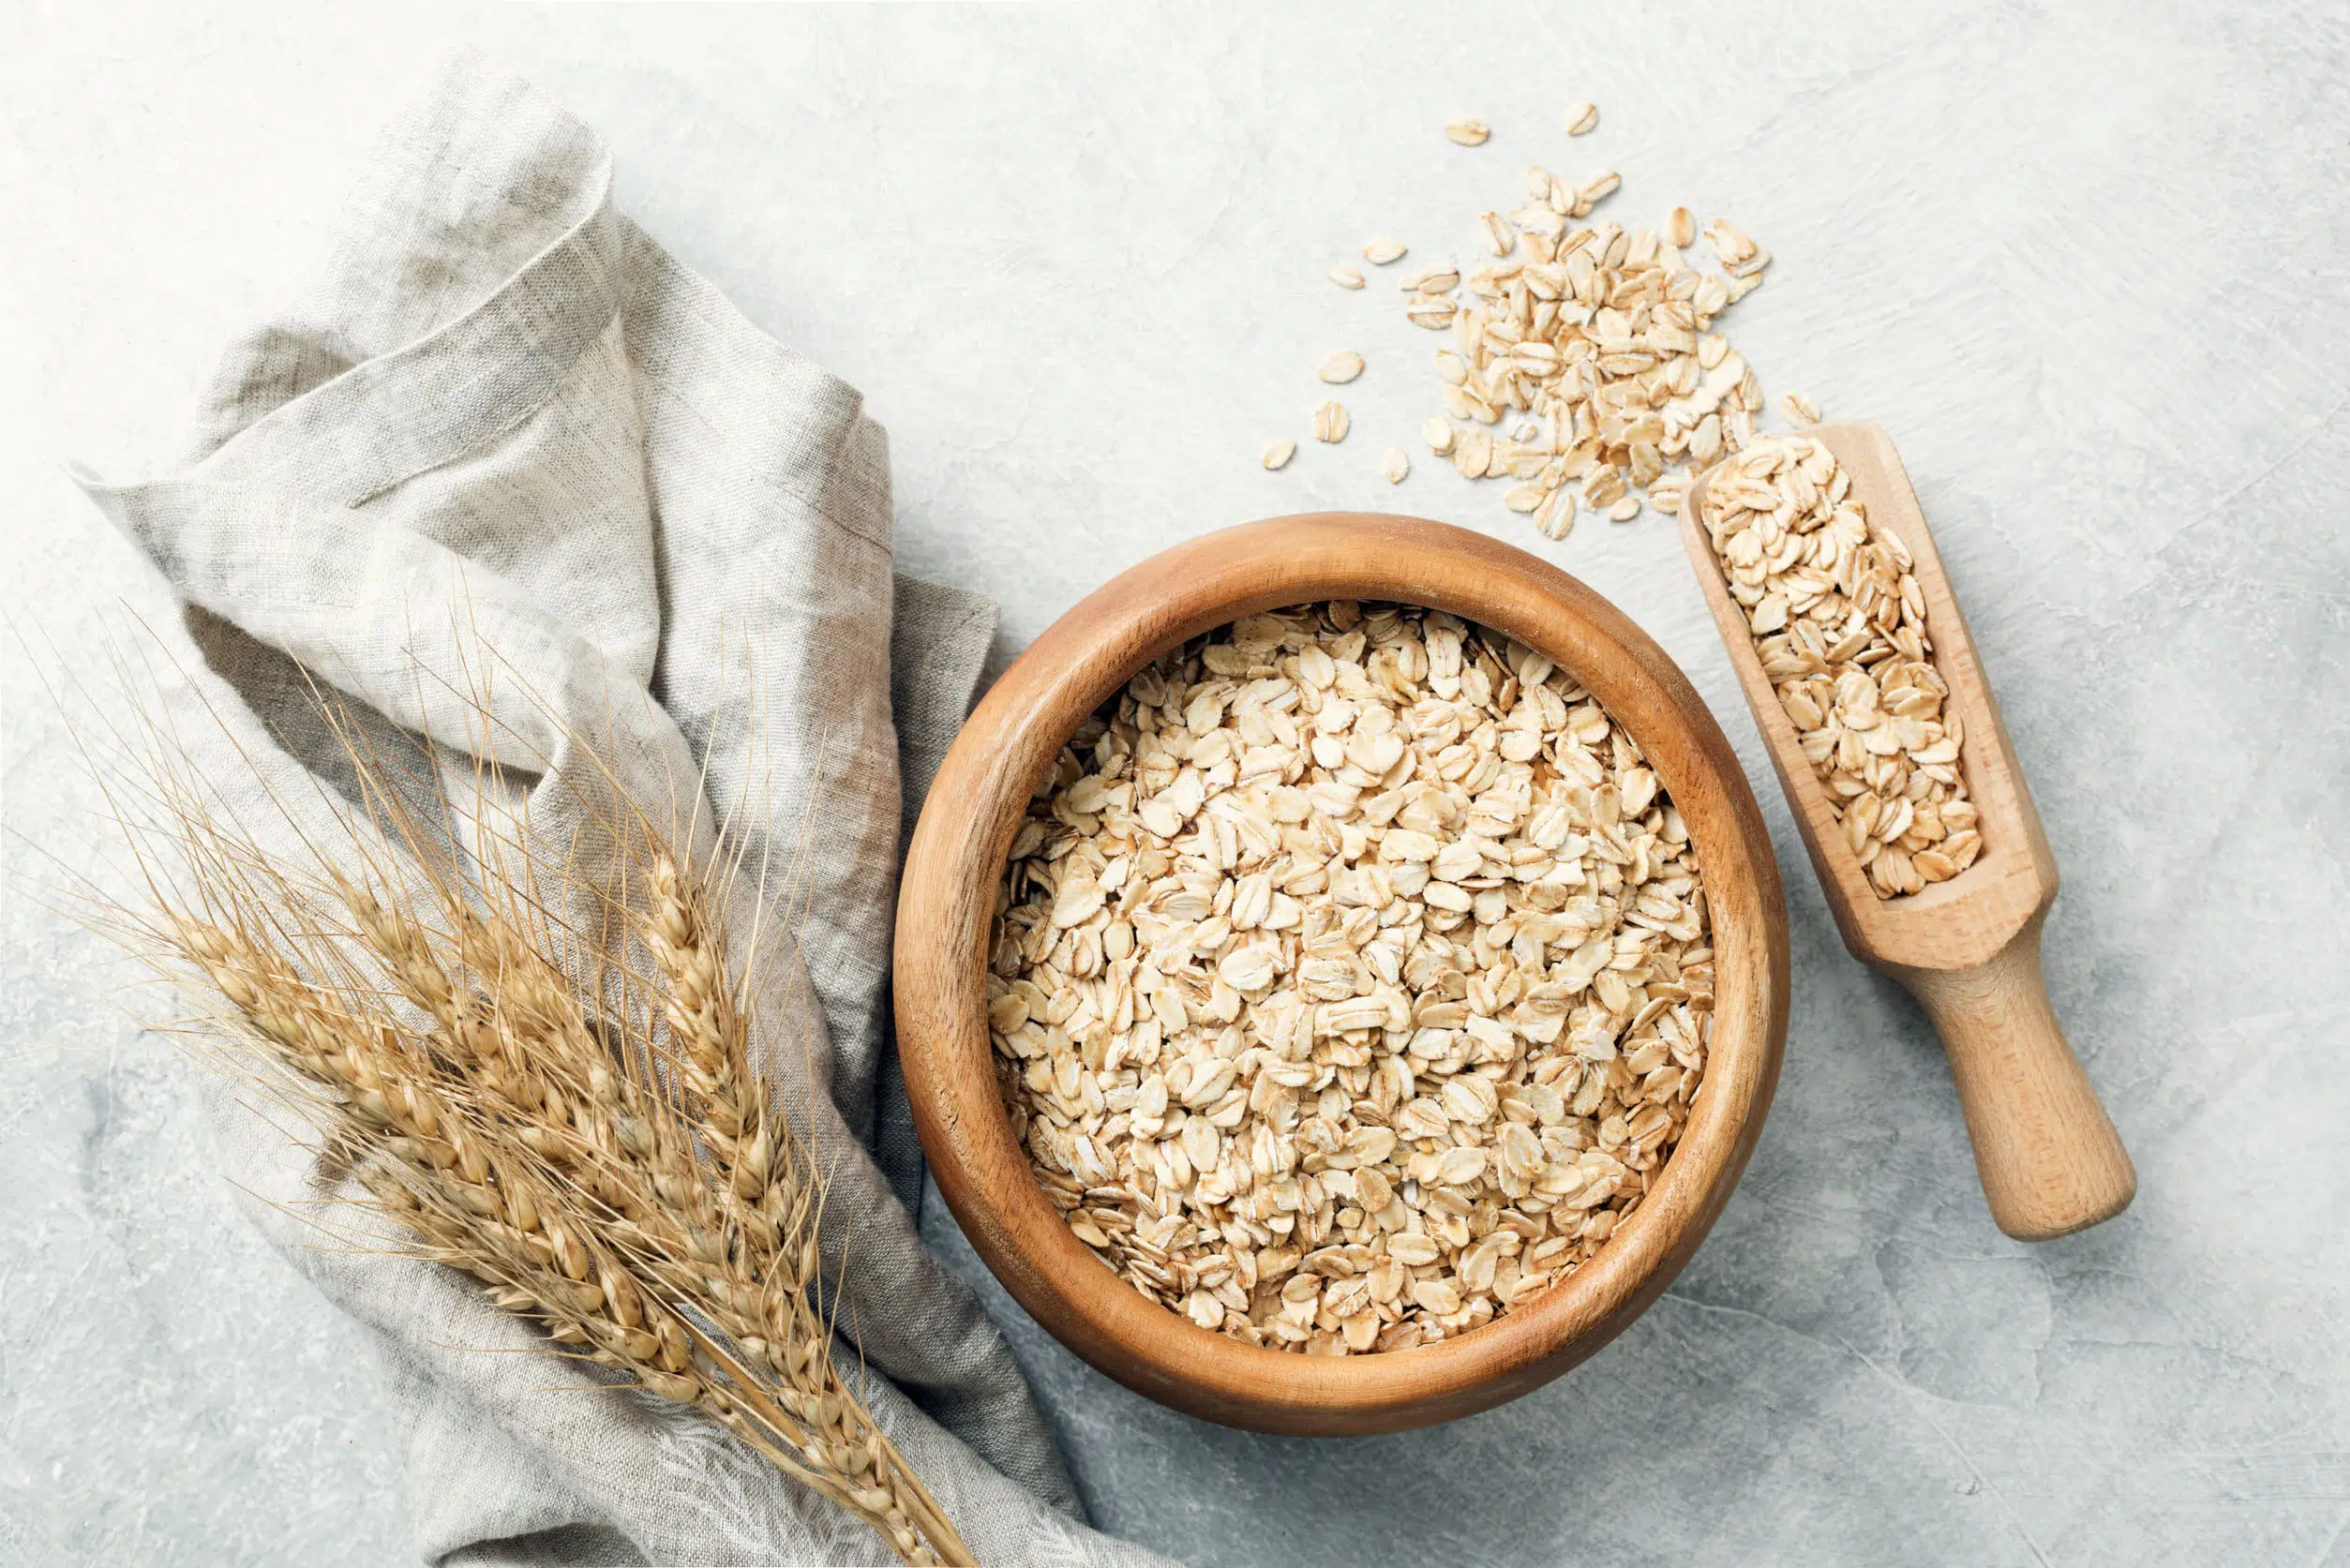 Rolled oats in wooden bowl and ears of wheat